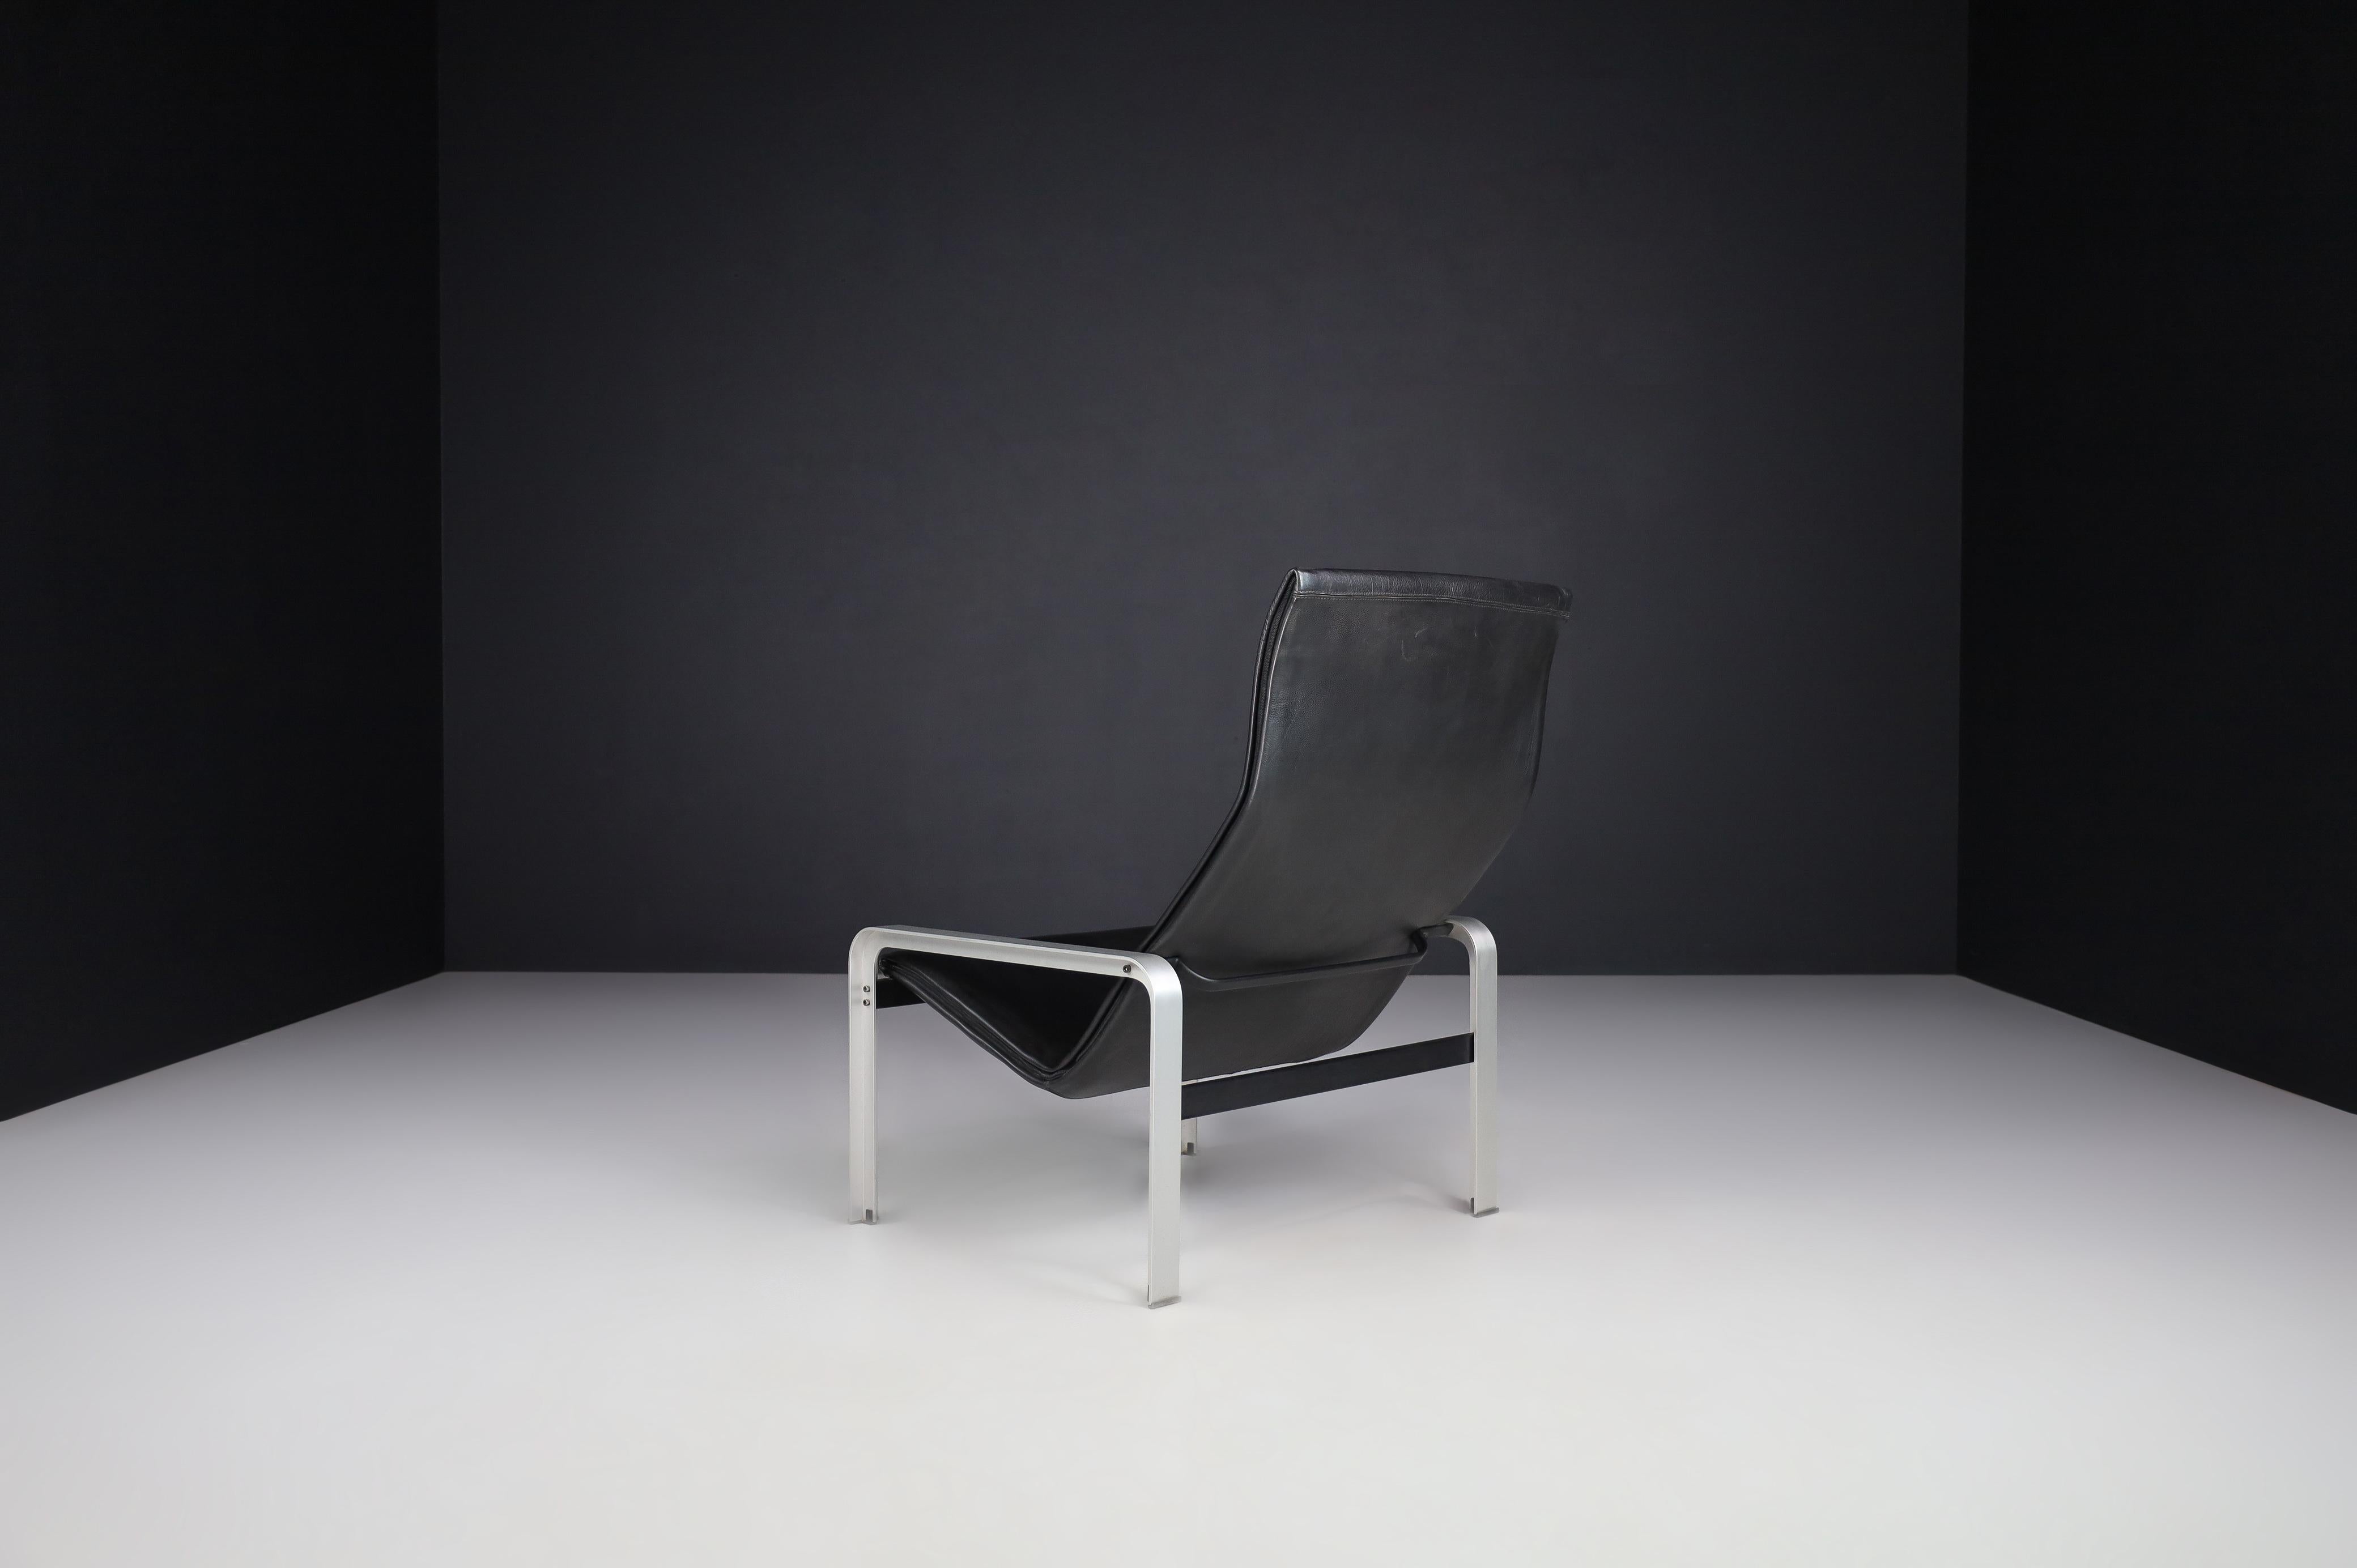 Metal Matteo Grassi Black Leather Lounge Chair, Italy, 1970s For Sale